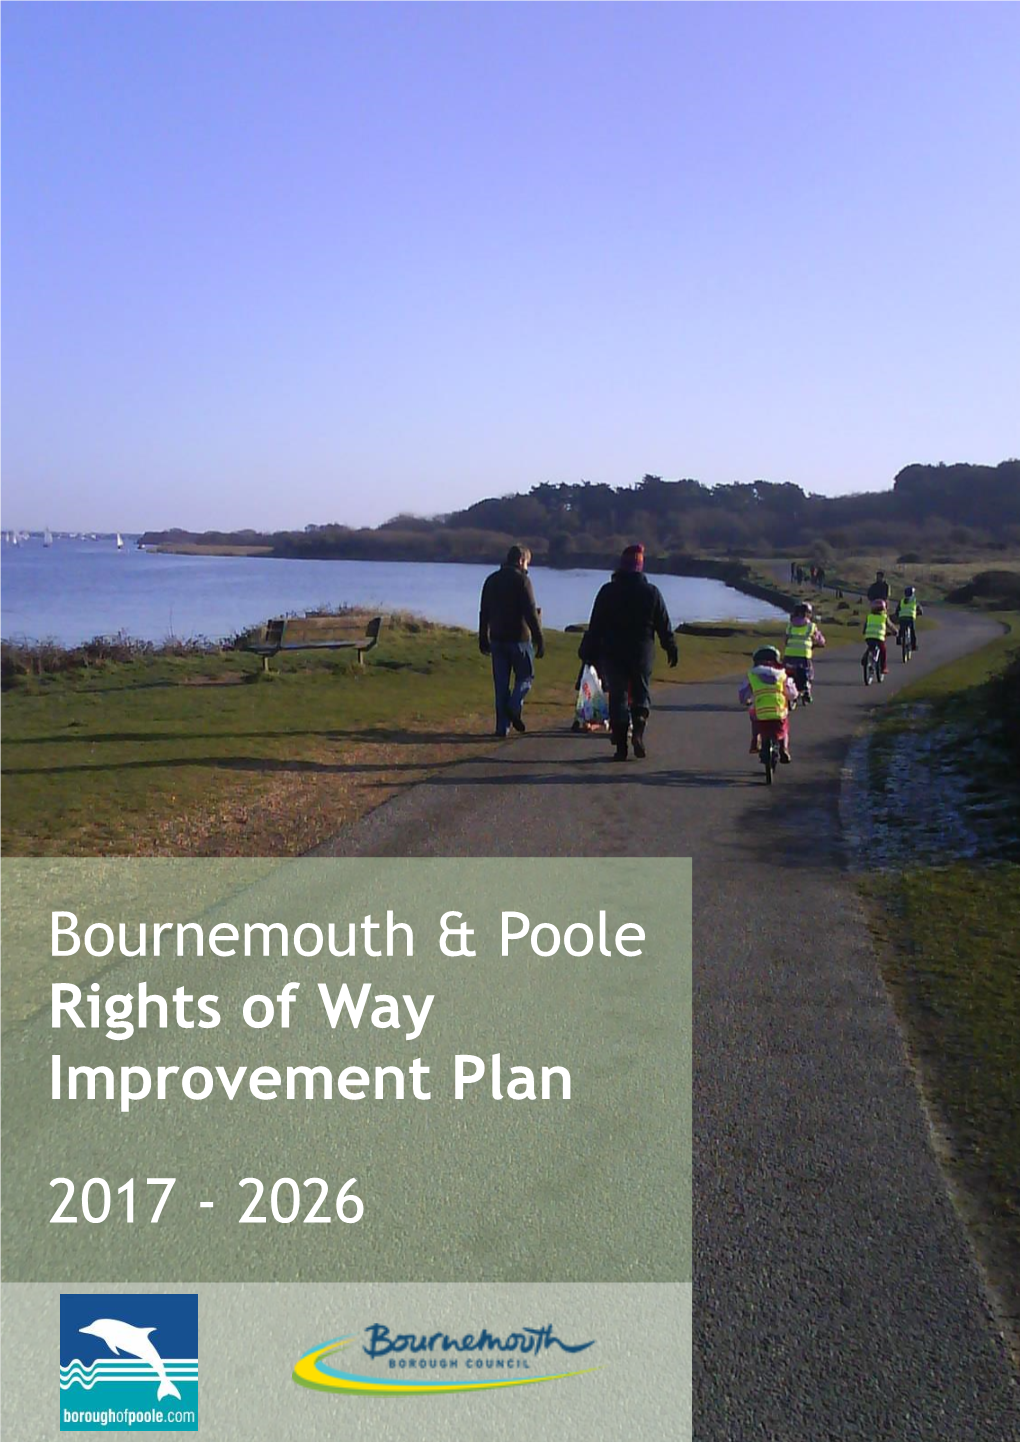 Poole and Bournemouth Rights of Way Improvement Plan